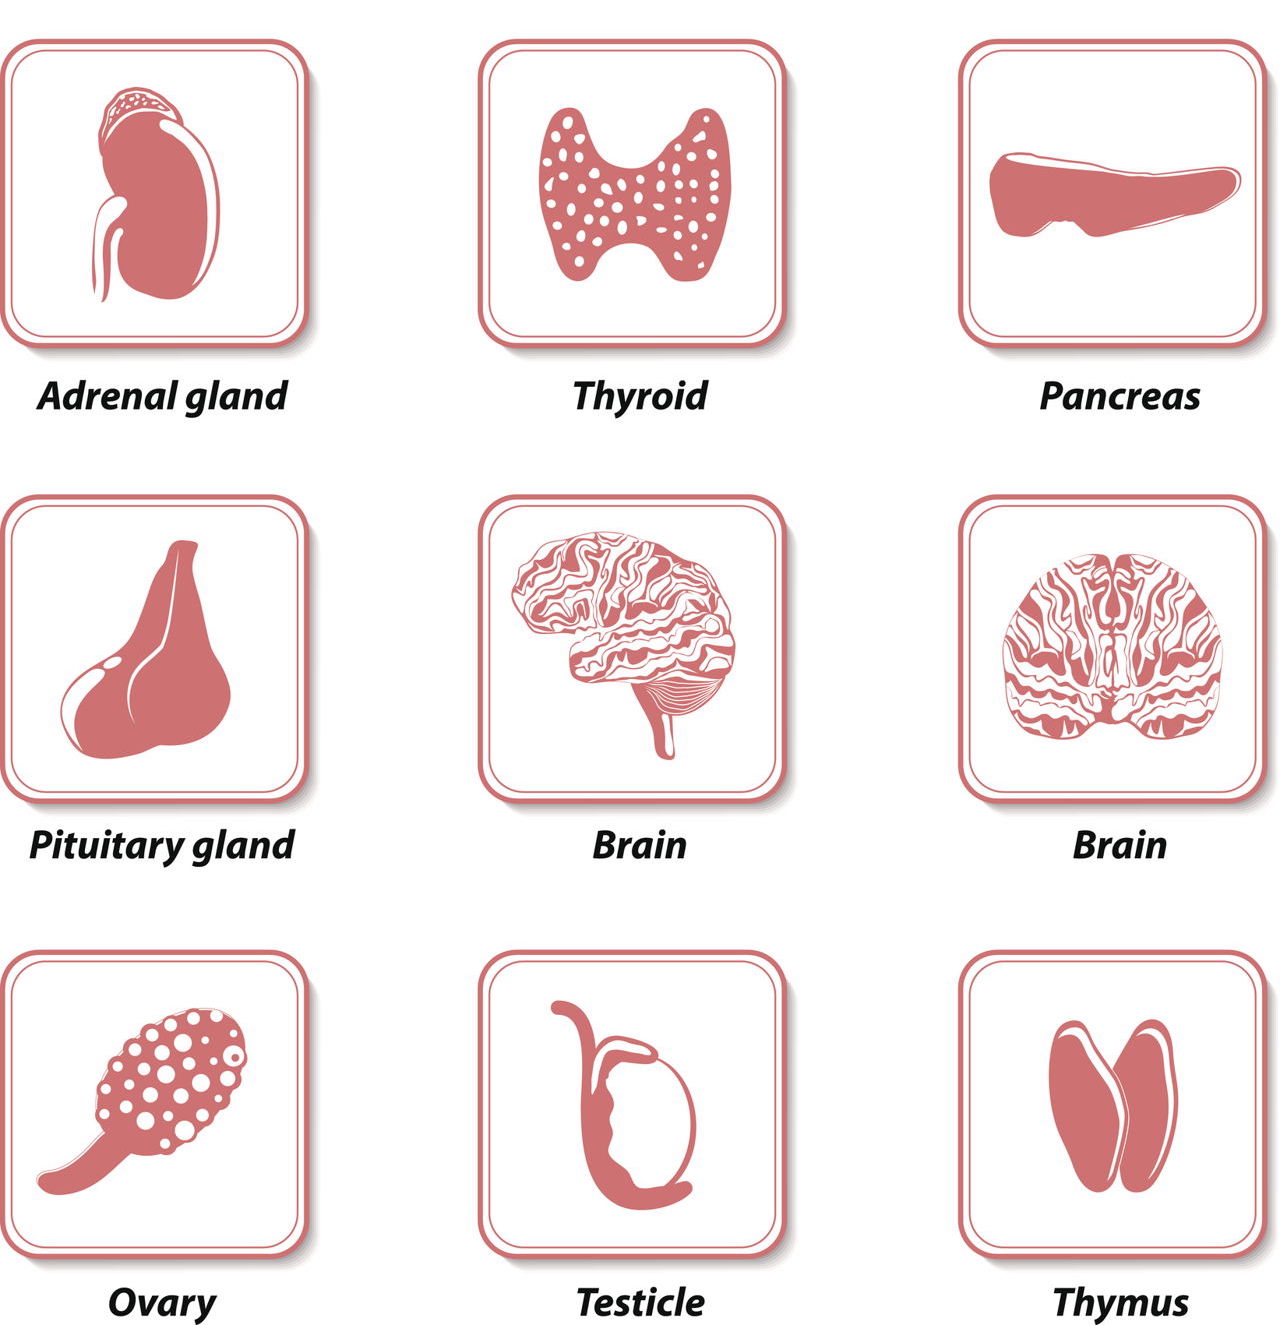 GET TO KNOW YOUR GLANDS